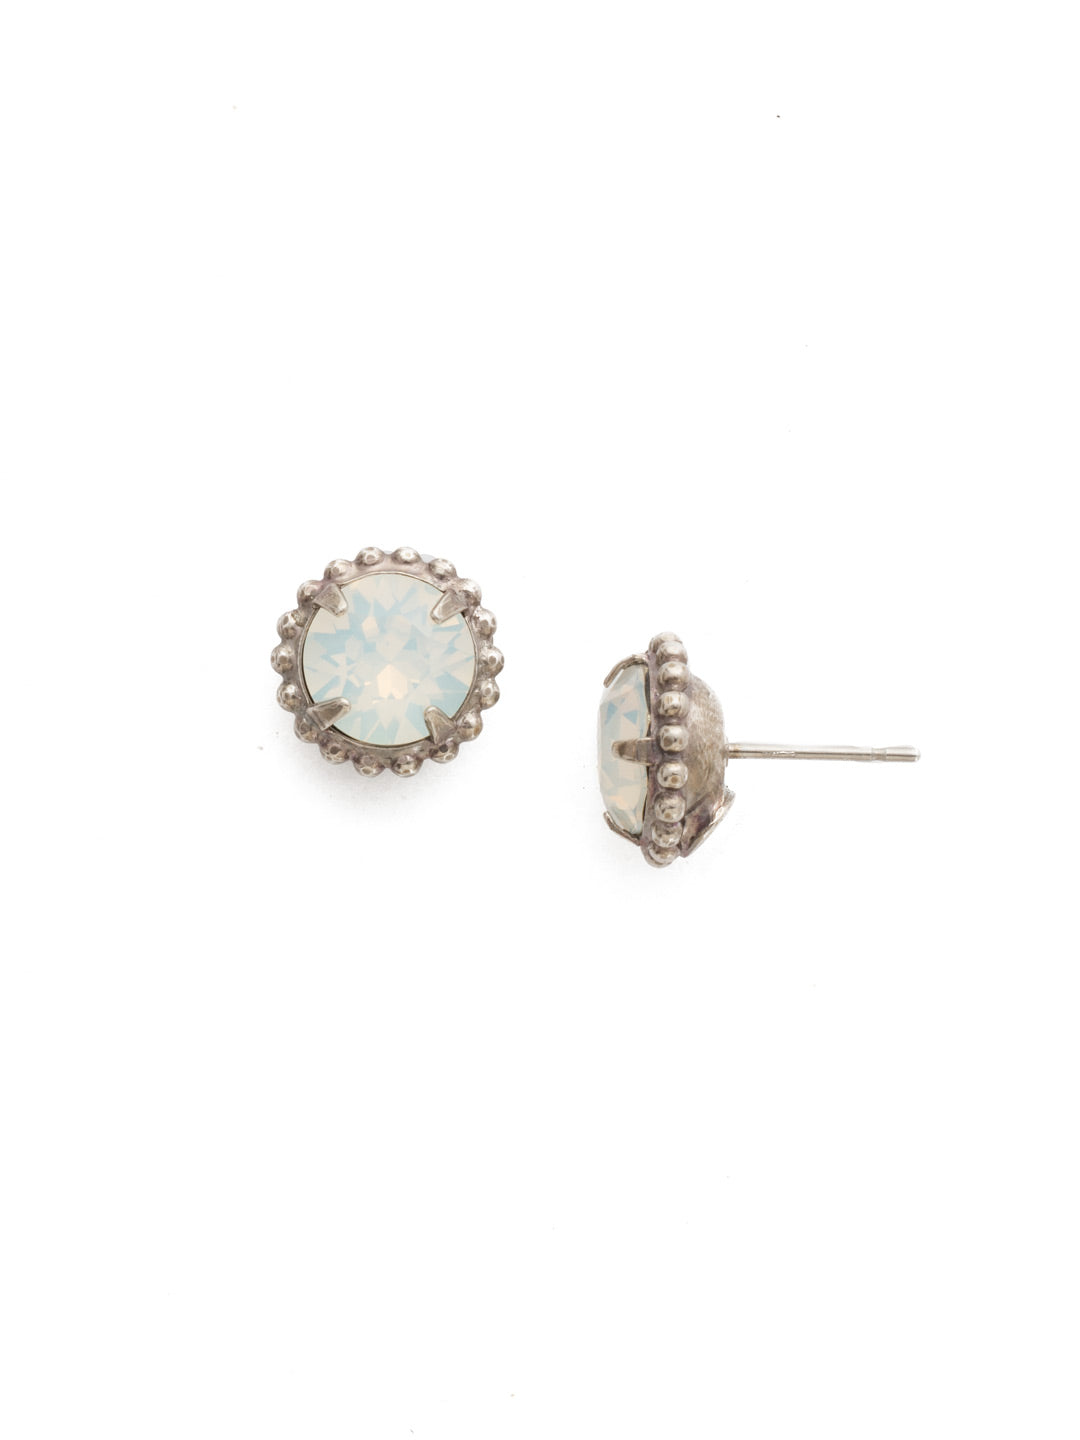 Simplicity Stud Earrings - EBY38ASWO - <p>A timeless classic, the Simplicity Stud Earrings feature round cut crystals in a variety of colors; accented with a halo of metal beaded detail. Need help picking a stud? <a href="https://www.sorrelli.com/blogs/sisterhood/round-stud-earrings-101-a-rundown-of-sizes-styles-and-sparkle">Check out our size guide!</a> From Sorrelli's White Opal collection in our Antique Silver-tone finish.</p>